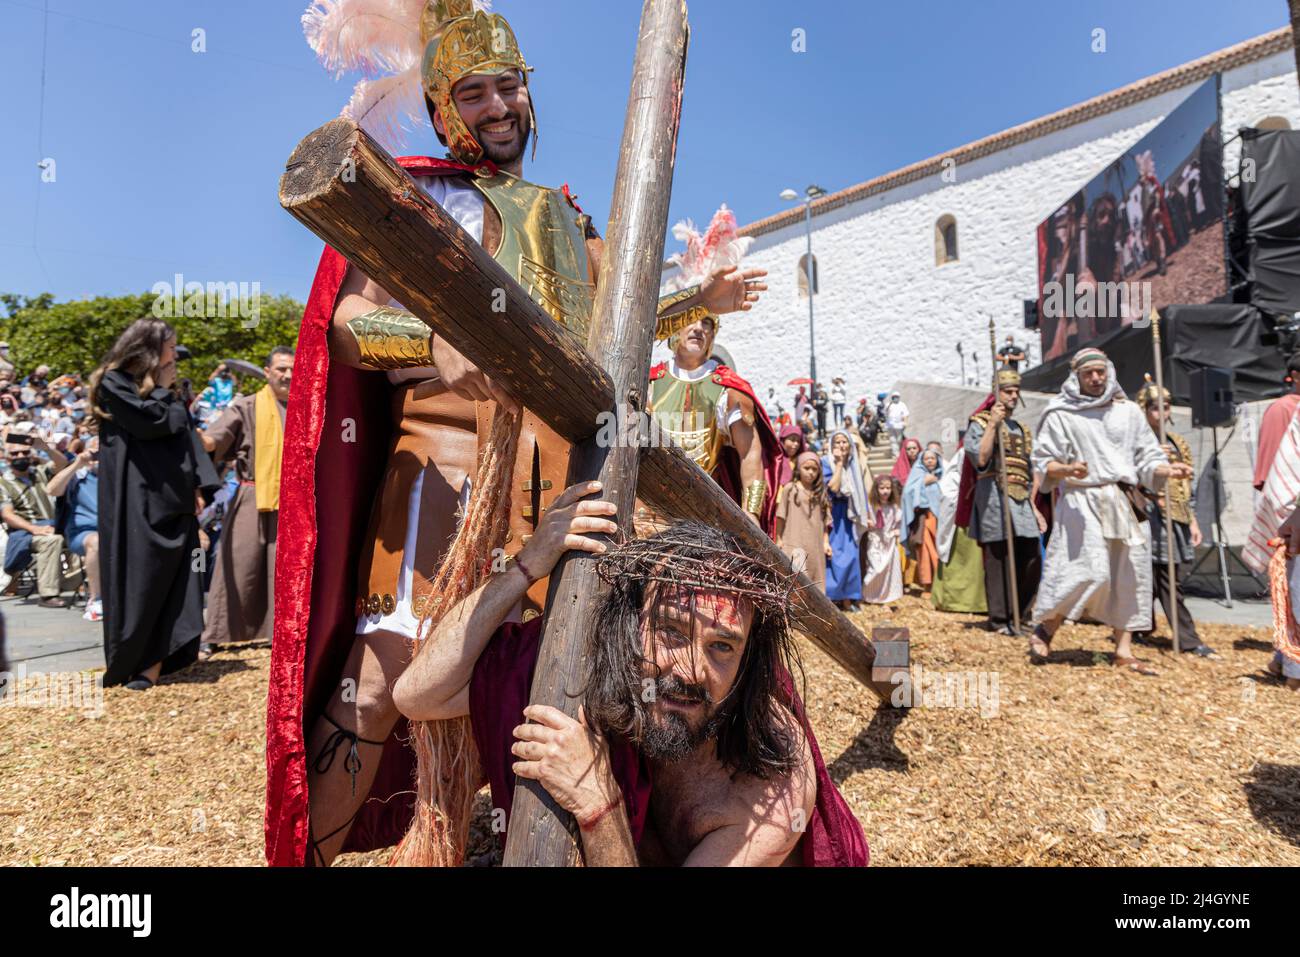 Adeje, Tenerife, Canary Islands, Spain. 15th Apr, 2022. The Good Friday Passion Play returns to Adeje after two years of not happening due to the Covid 19 pandemic. The spectacle is transmitted live to the whole of Spain and this year for the first time involved a film telling the story of the first part followed by the final act of the crucifixion held live in the Plaza de España, Adeje. Stock Photo